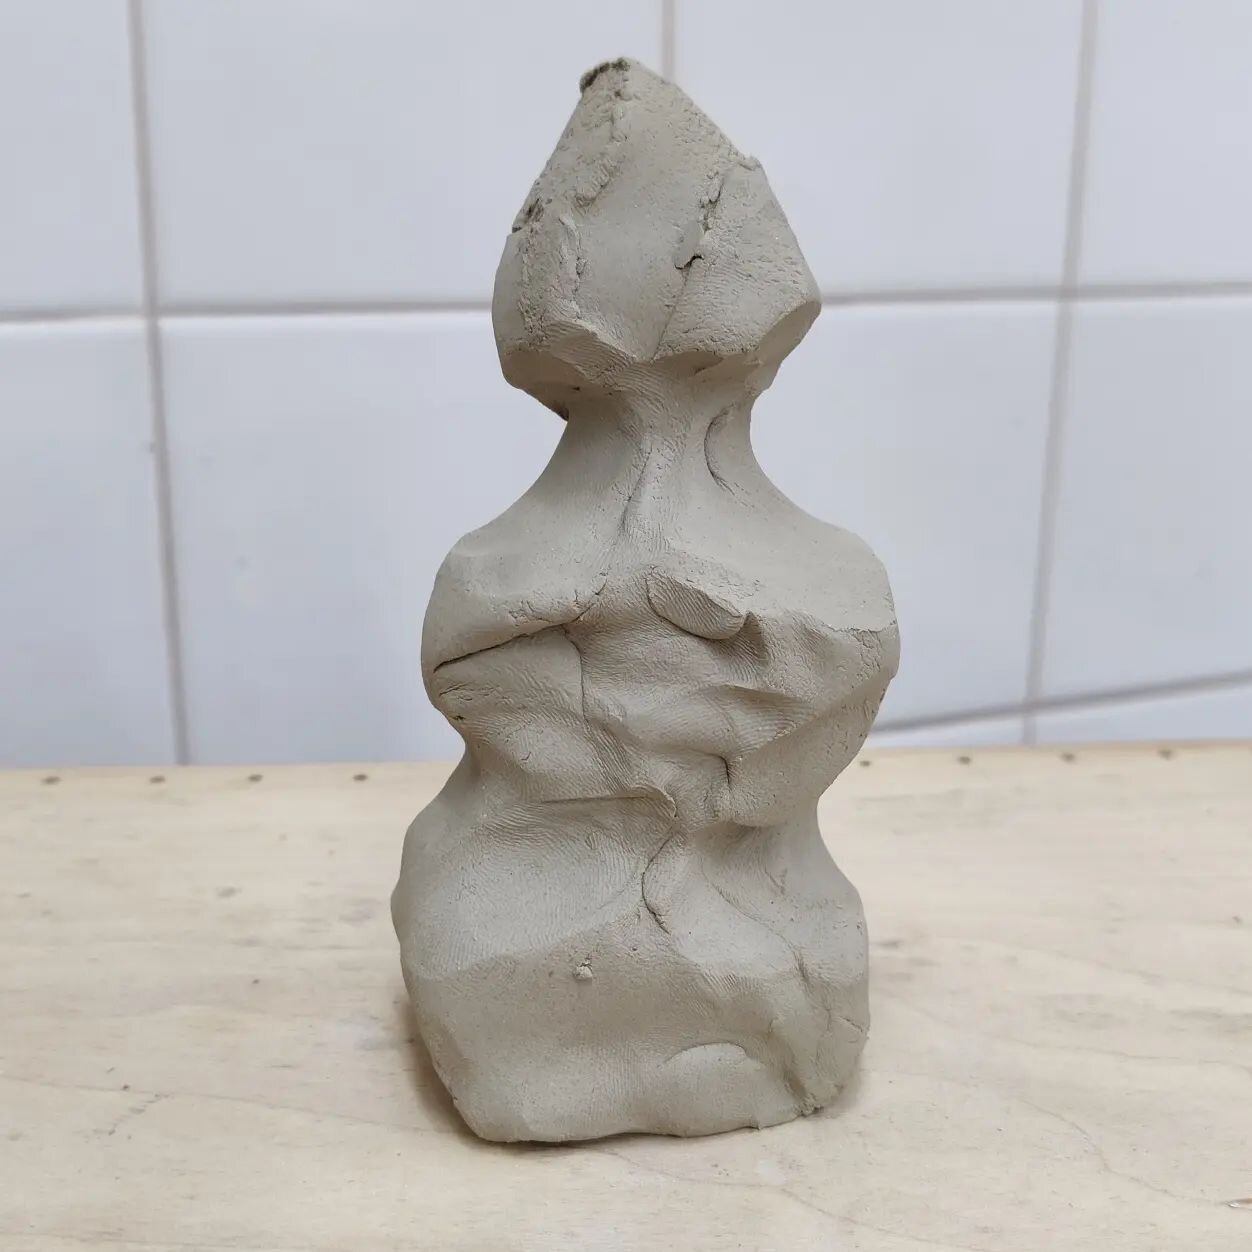 Process pictures of this morning's play with Apollo stoneware paperclay not my favourite so far but that could all change at the bisque stage! 

#uclanceramics #uclanmasters #uclanarts #uclanvictoriabuilding #uclan #artistsoninstagram #artist #sculpt